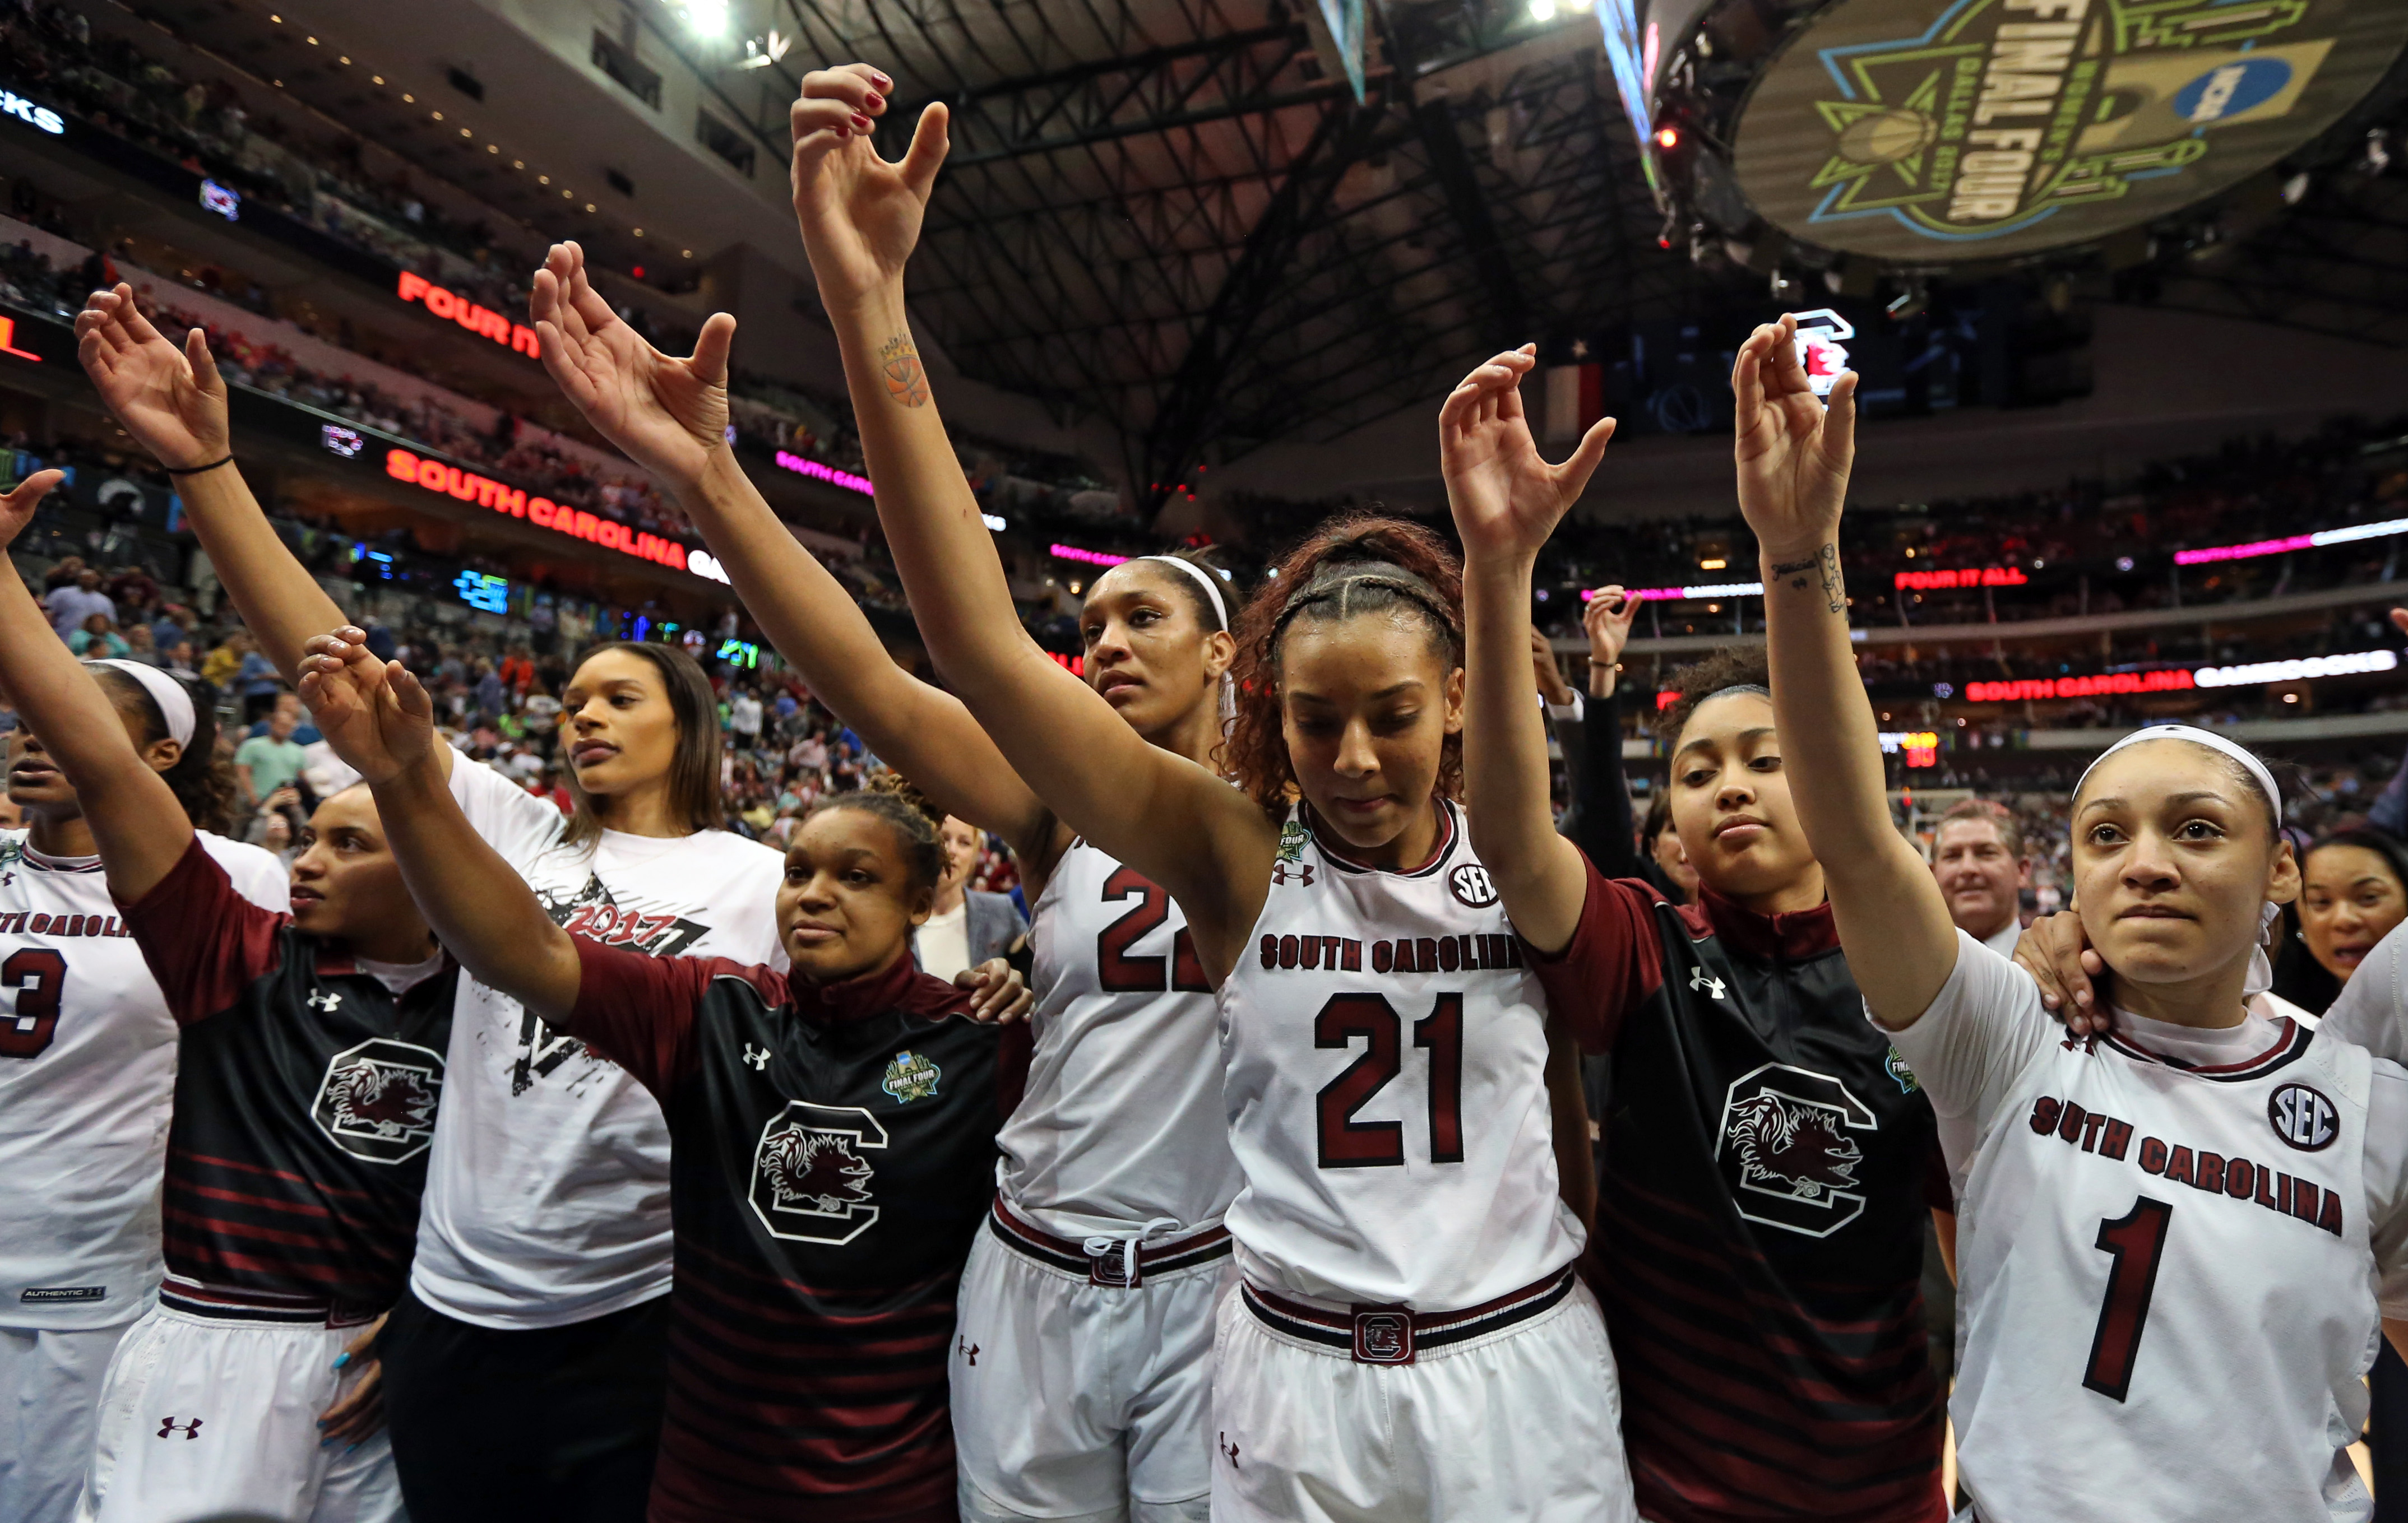 Gamecocks Women's Basketball Advances to First Ever National